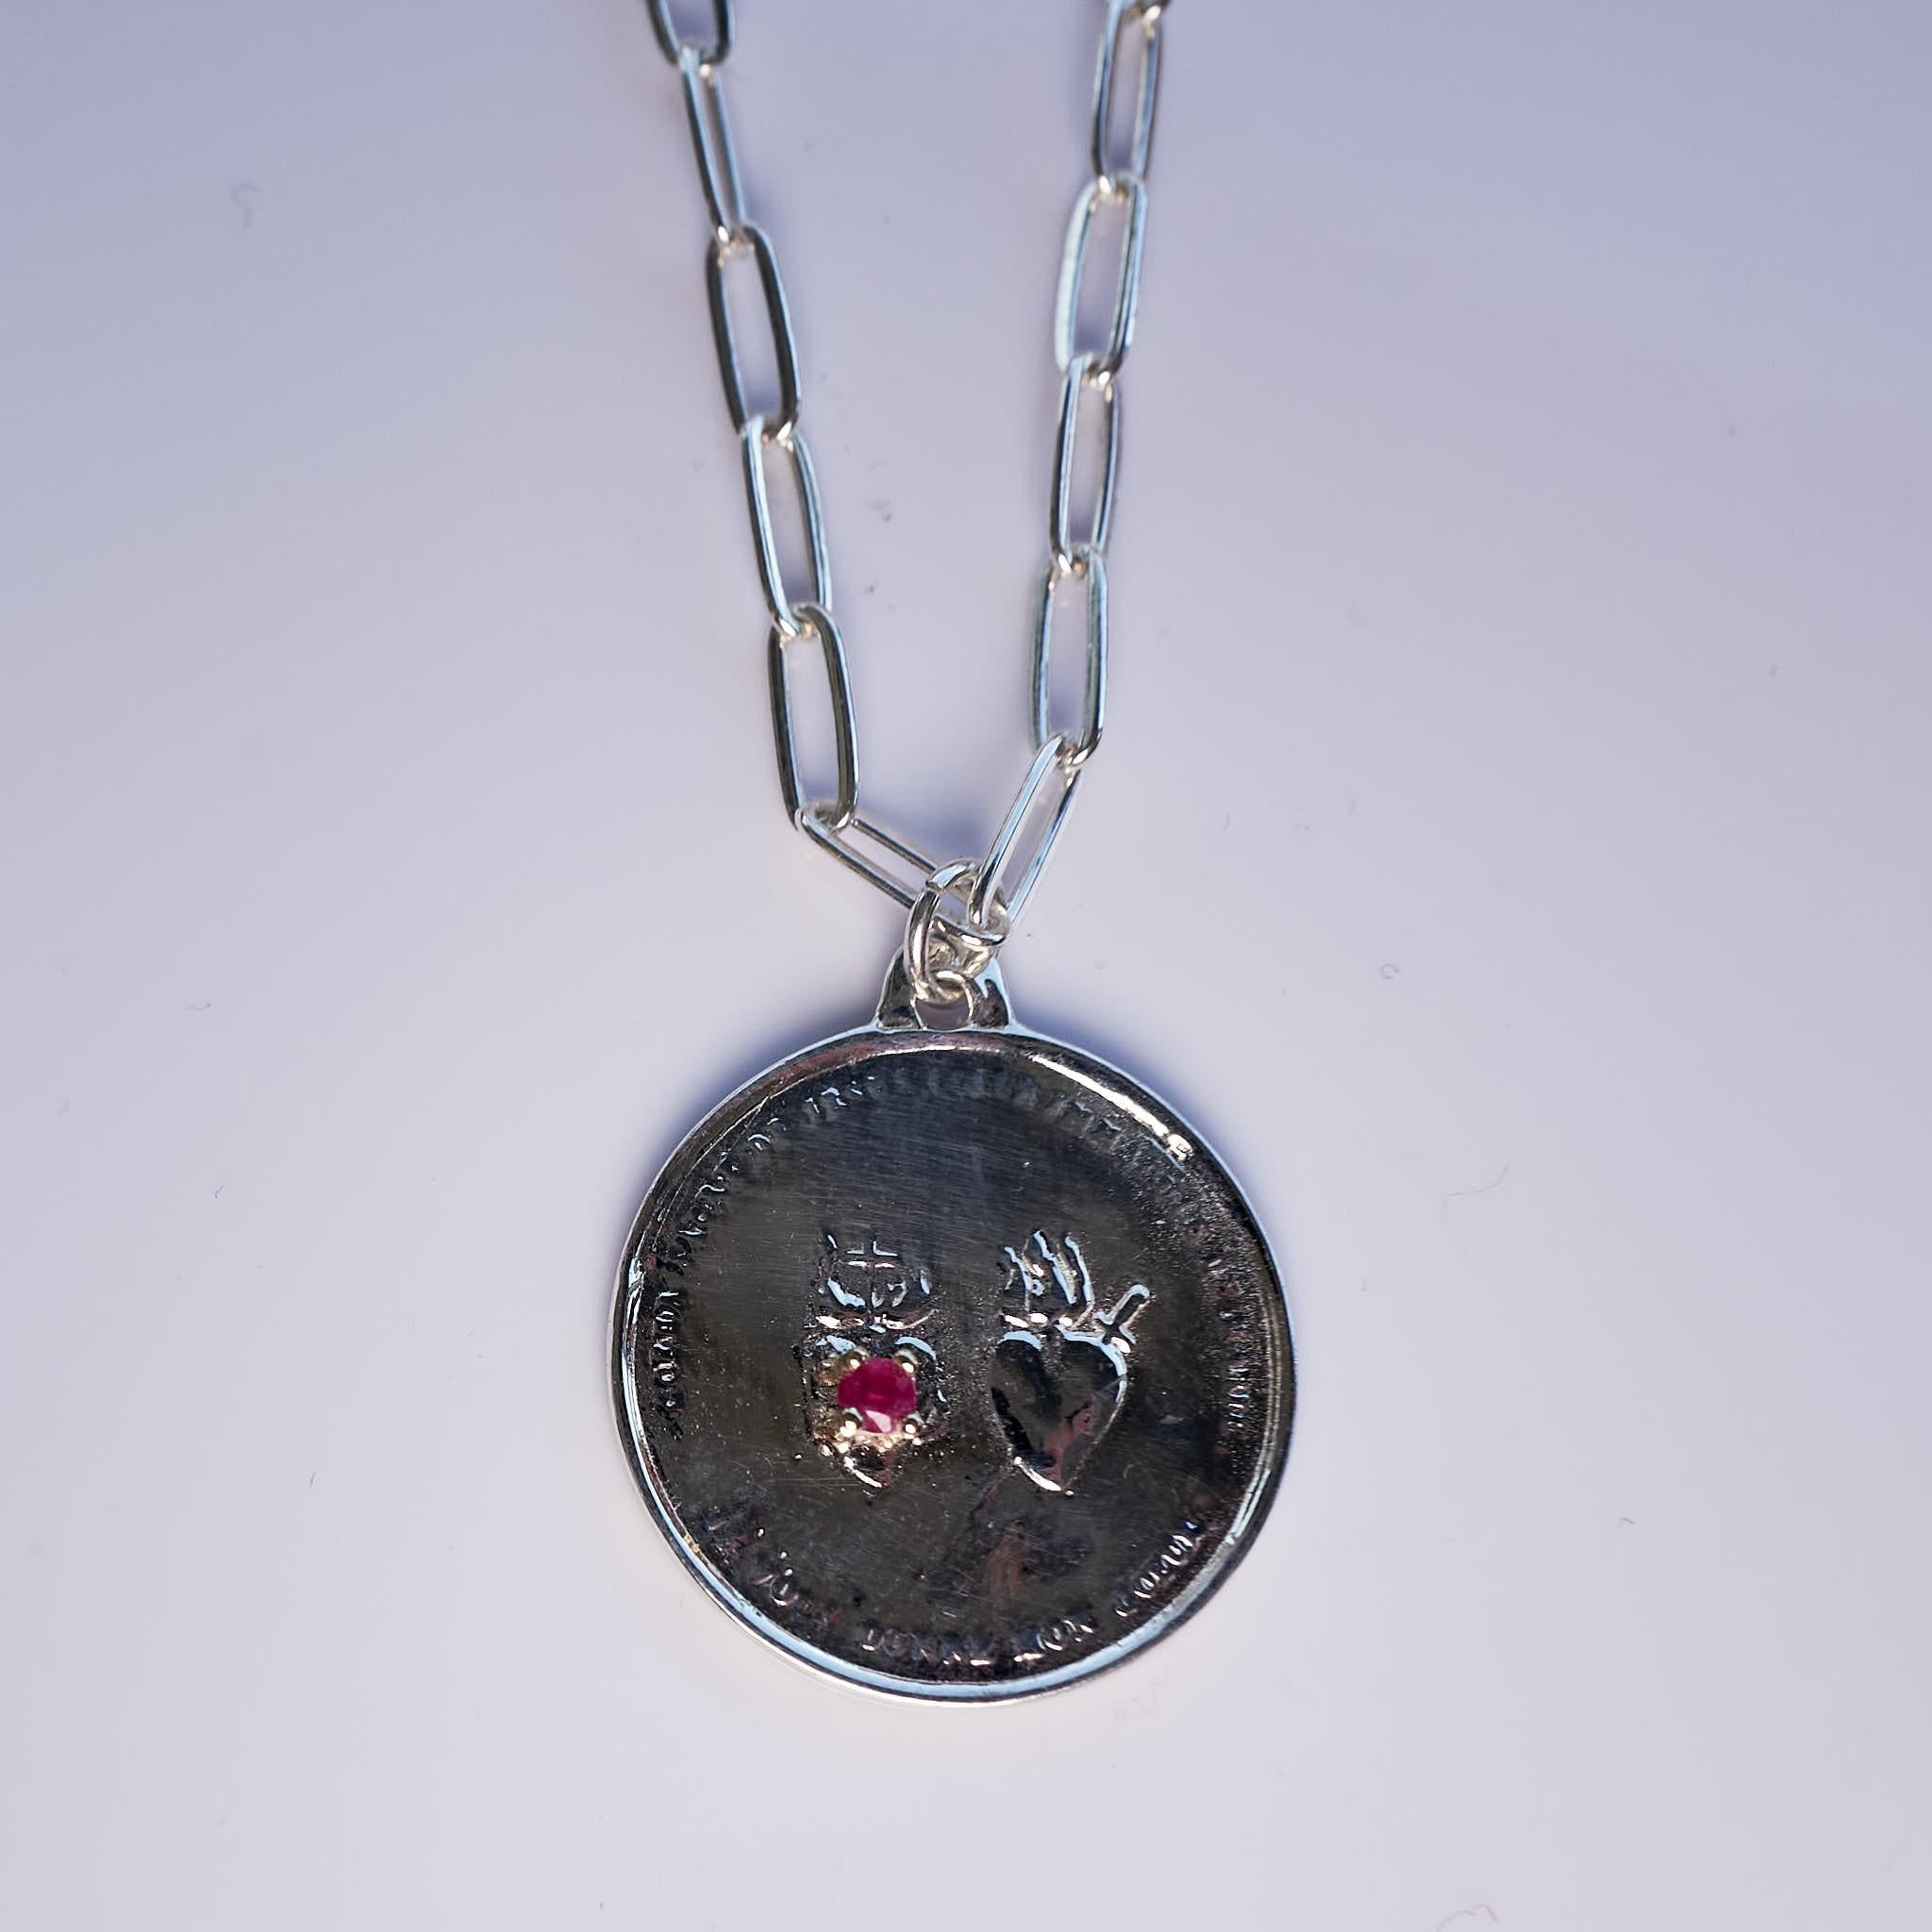 Brilliant Cut Ruby Sacred Twin Heart Silver Medal Necklace on a Silver Chain J Dauphin For Sale